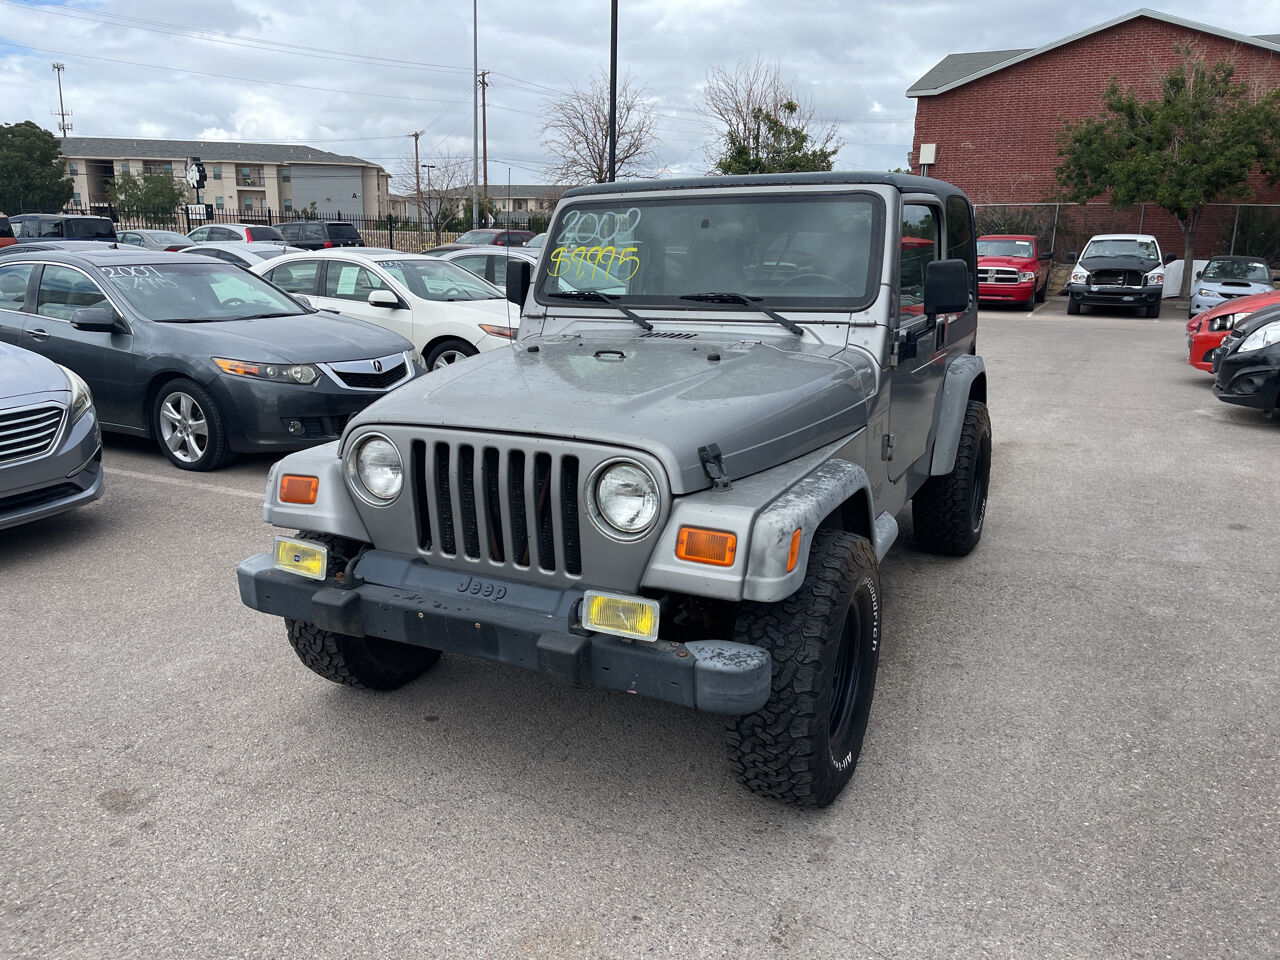 2002 Jeep Wrangler For Sale In Texas ®